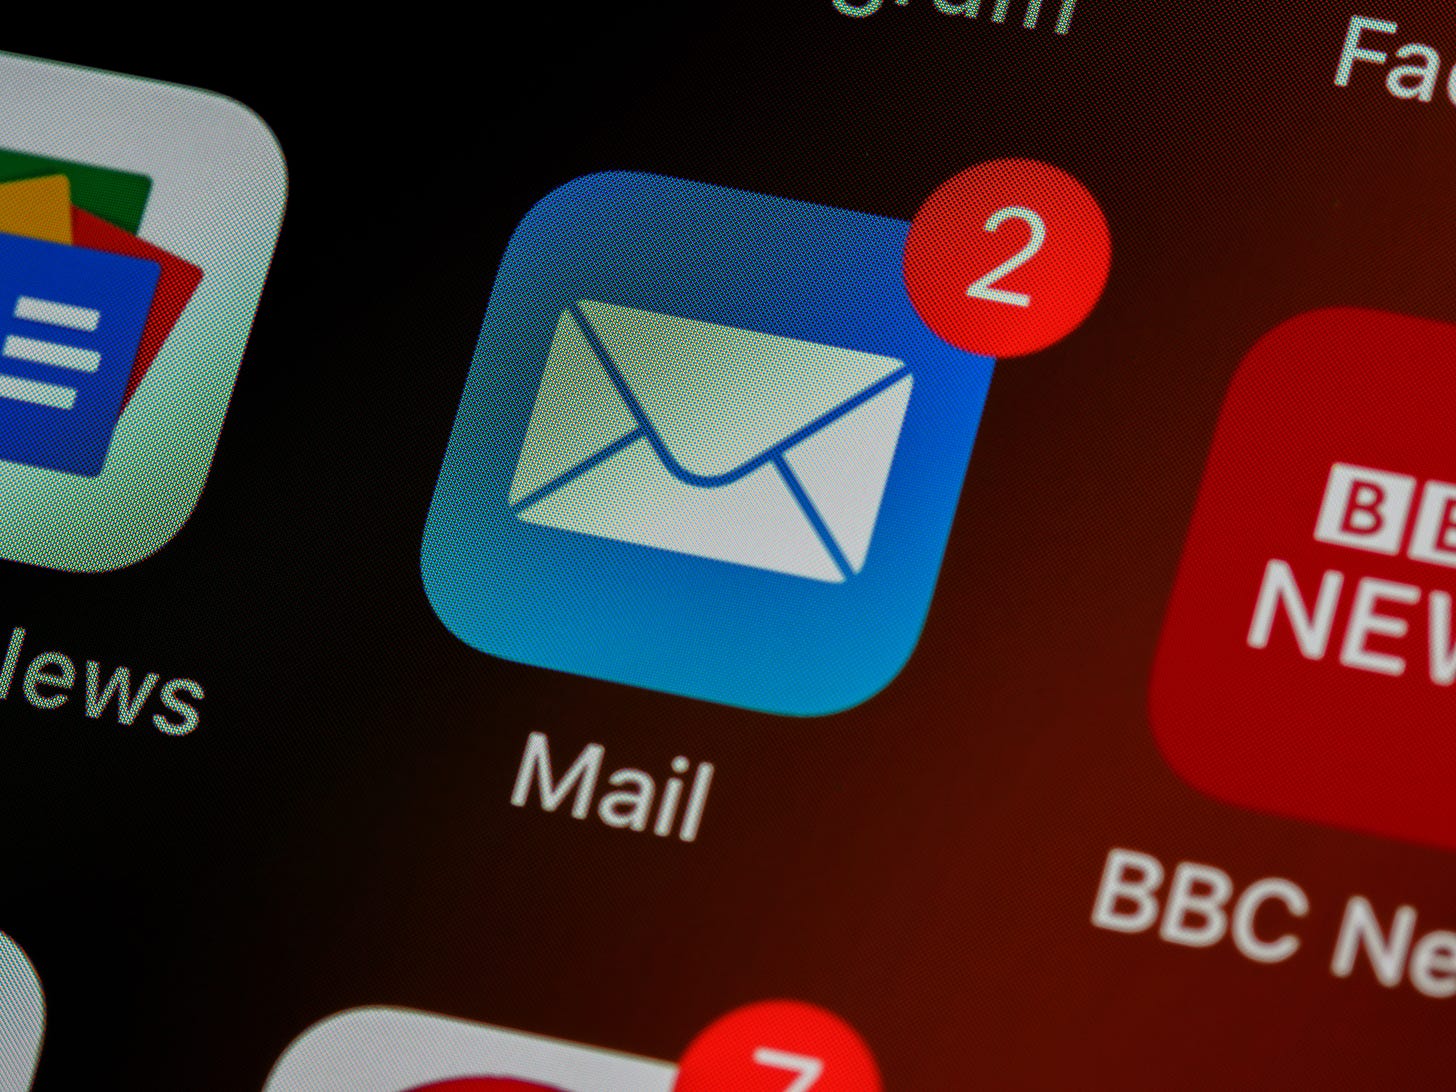 A photo of an email app icon showing two new emails.